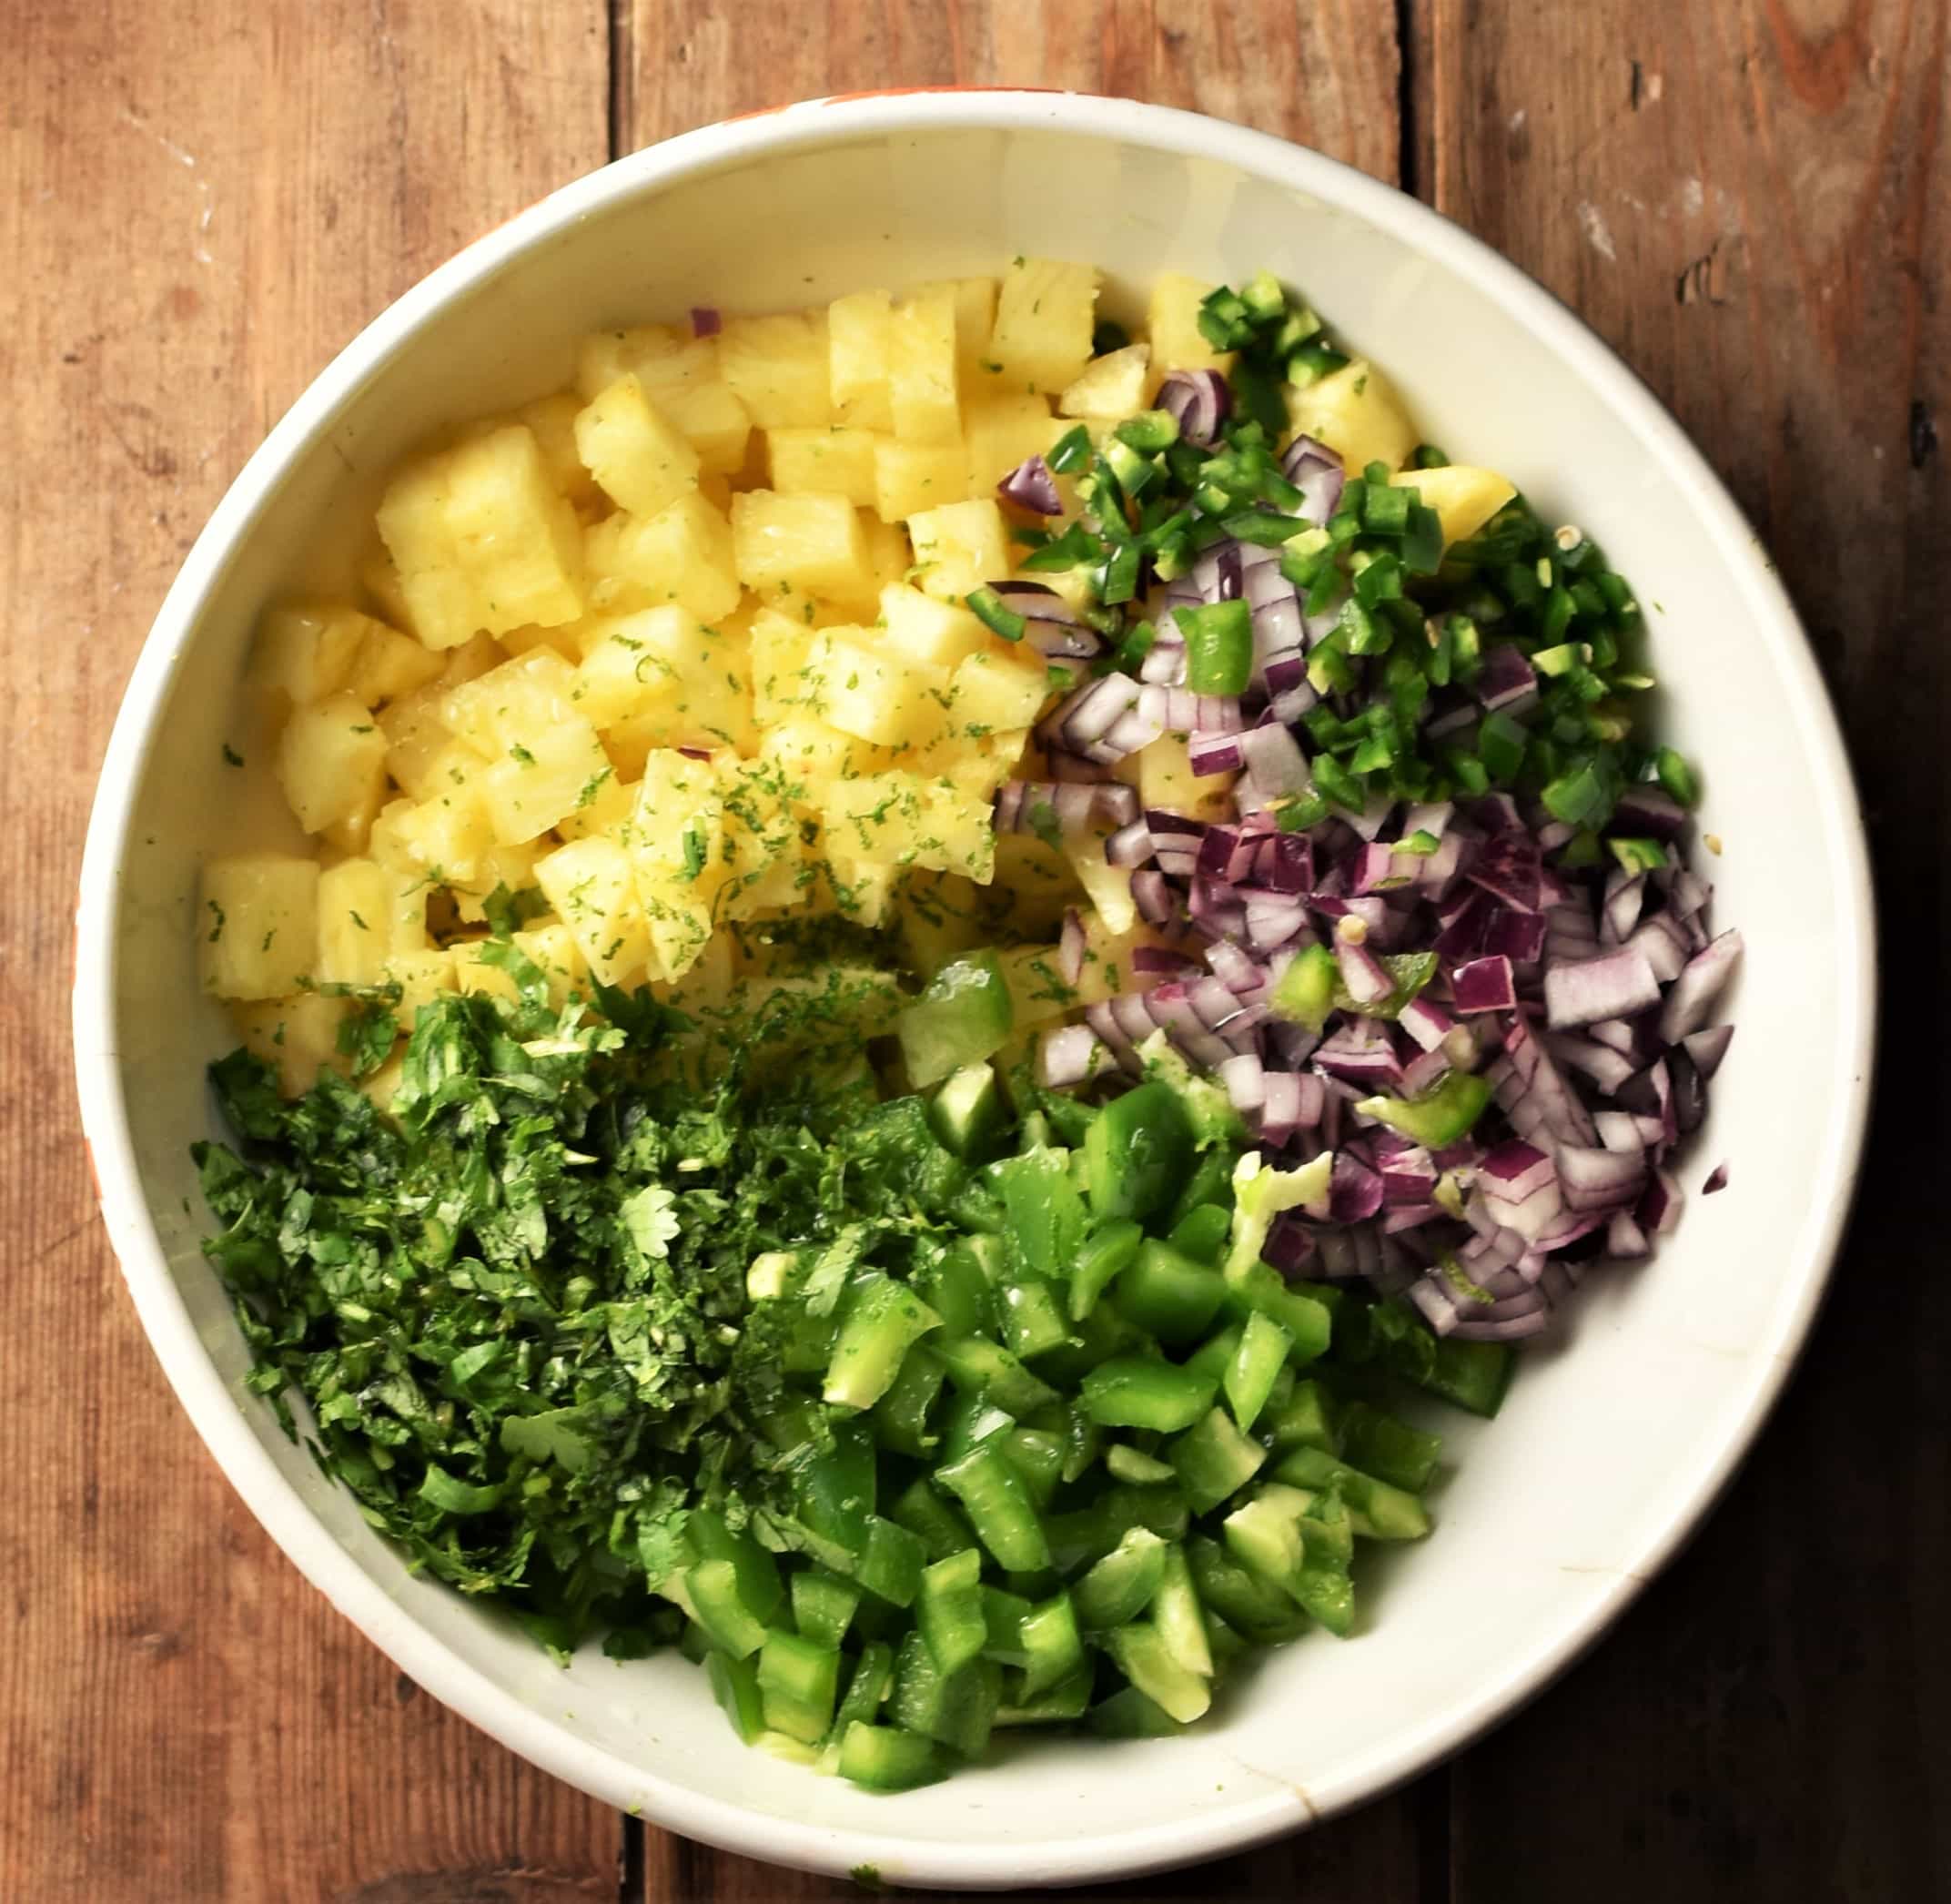 Chopped pineapple, green pepper, cilantro and red onion in white bowl.